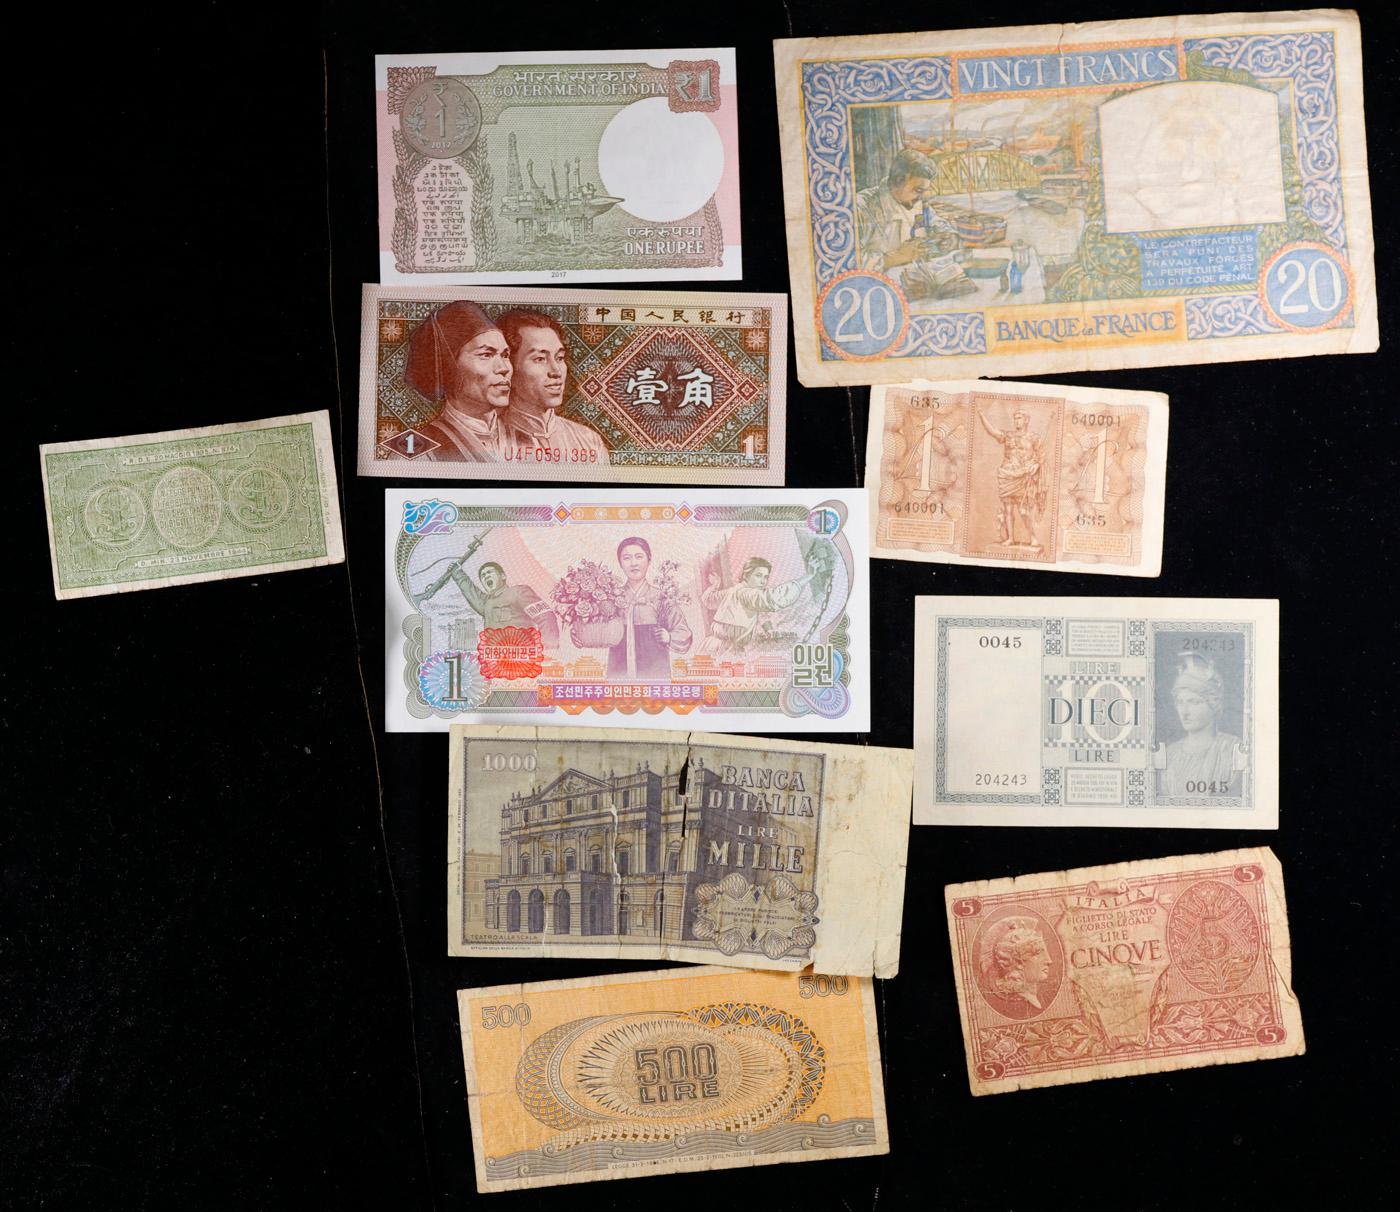 Lot of 10 Foreign Currency Notes, Various Countries & Denominations! Grades